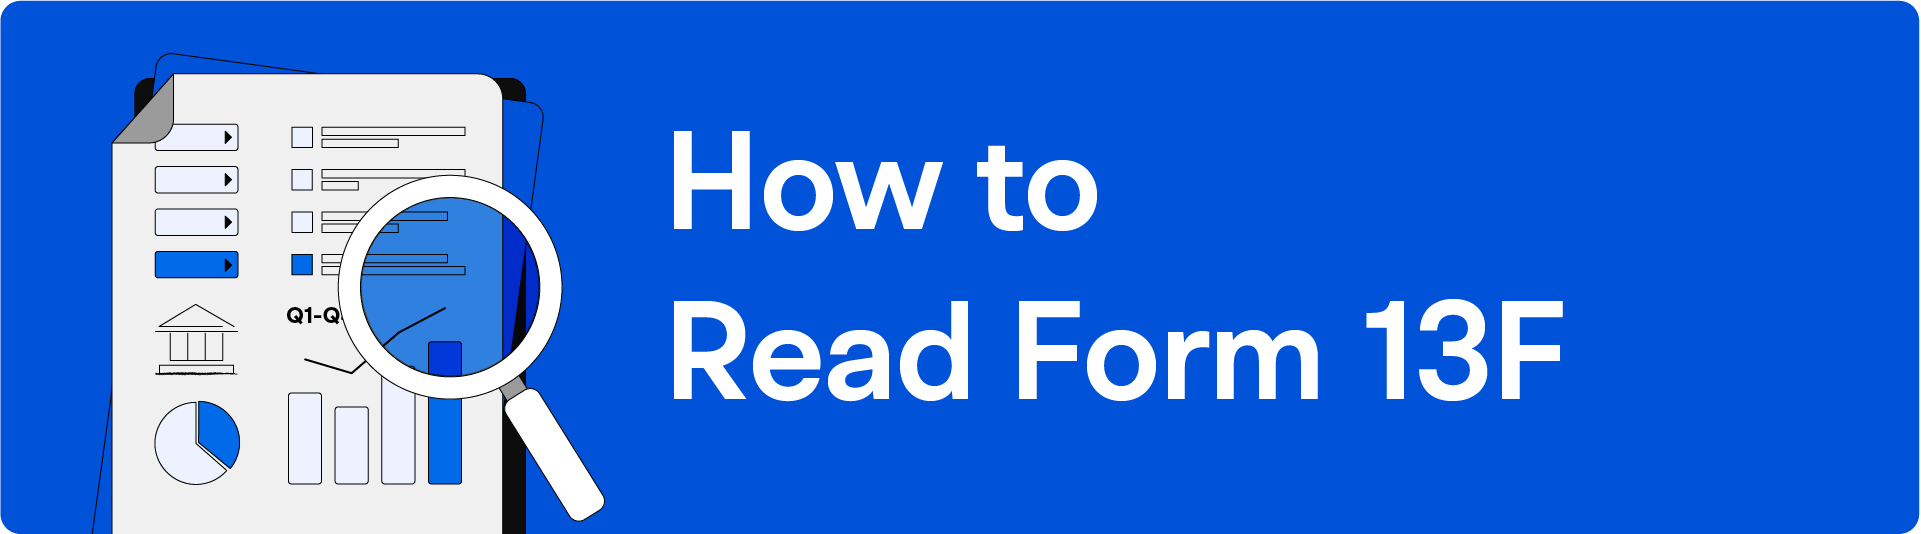 03 How to Read Form 13F -1